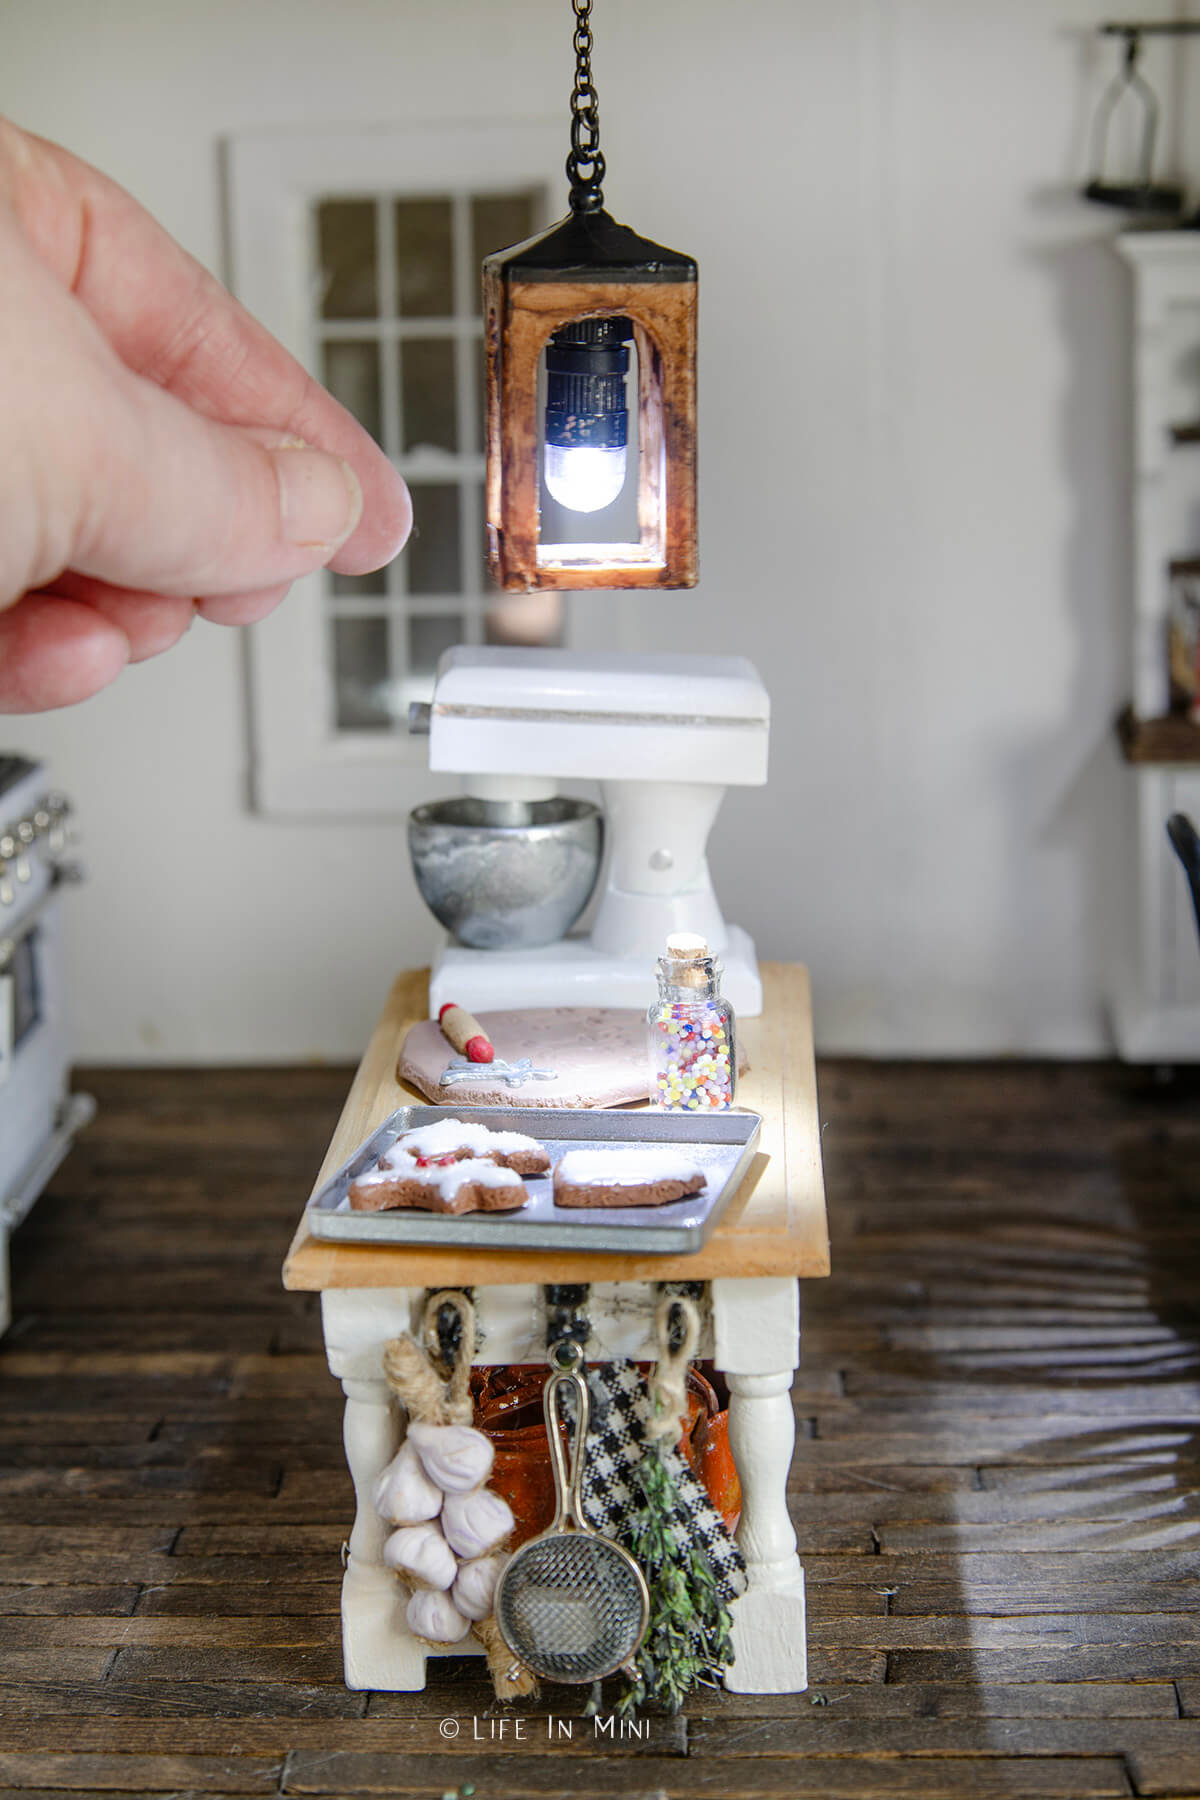 A hand placing a miniature lantern pendant light lit and hanging in a dollhouse kitchen